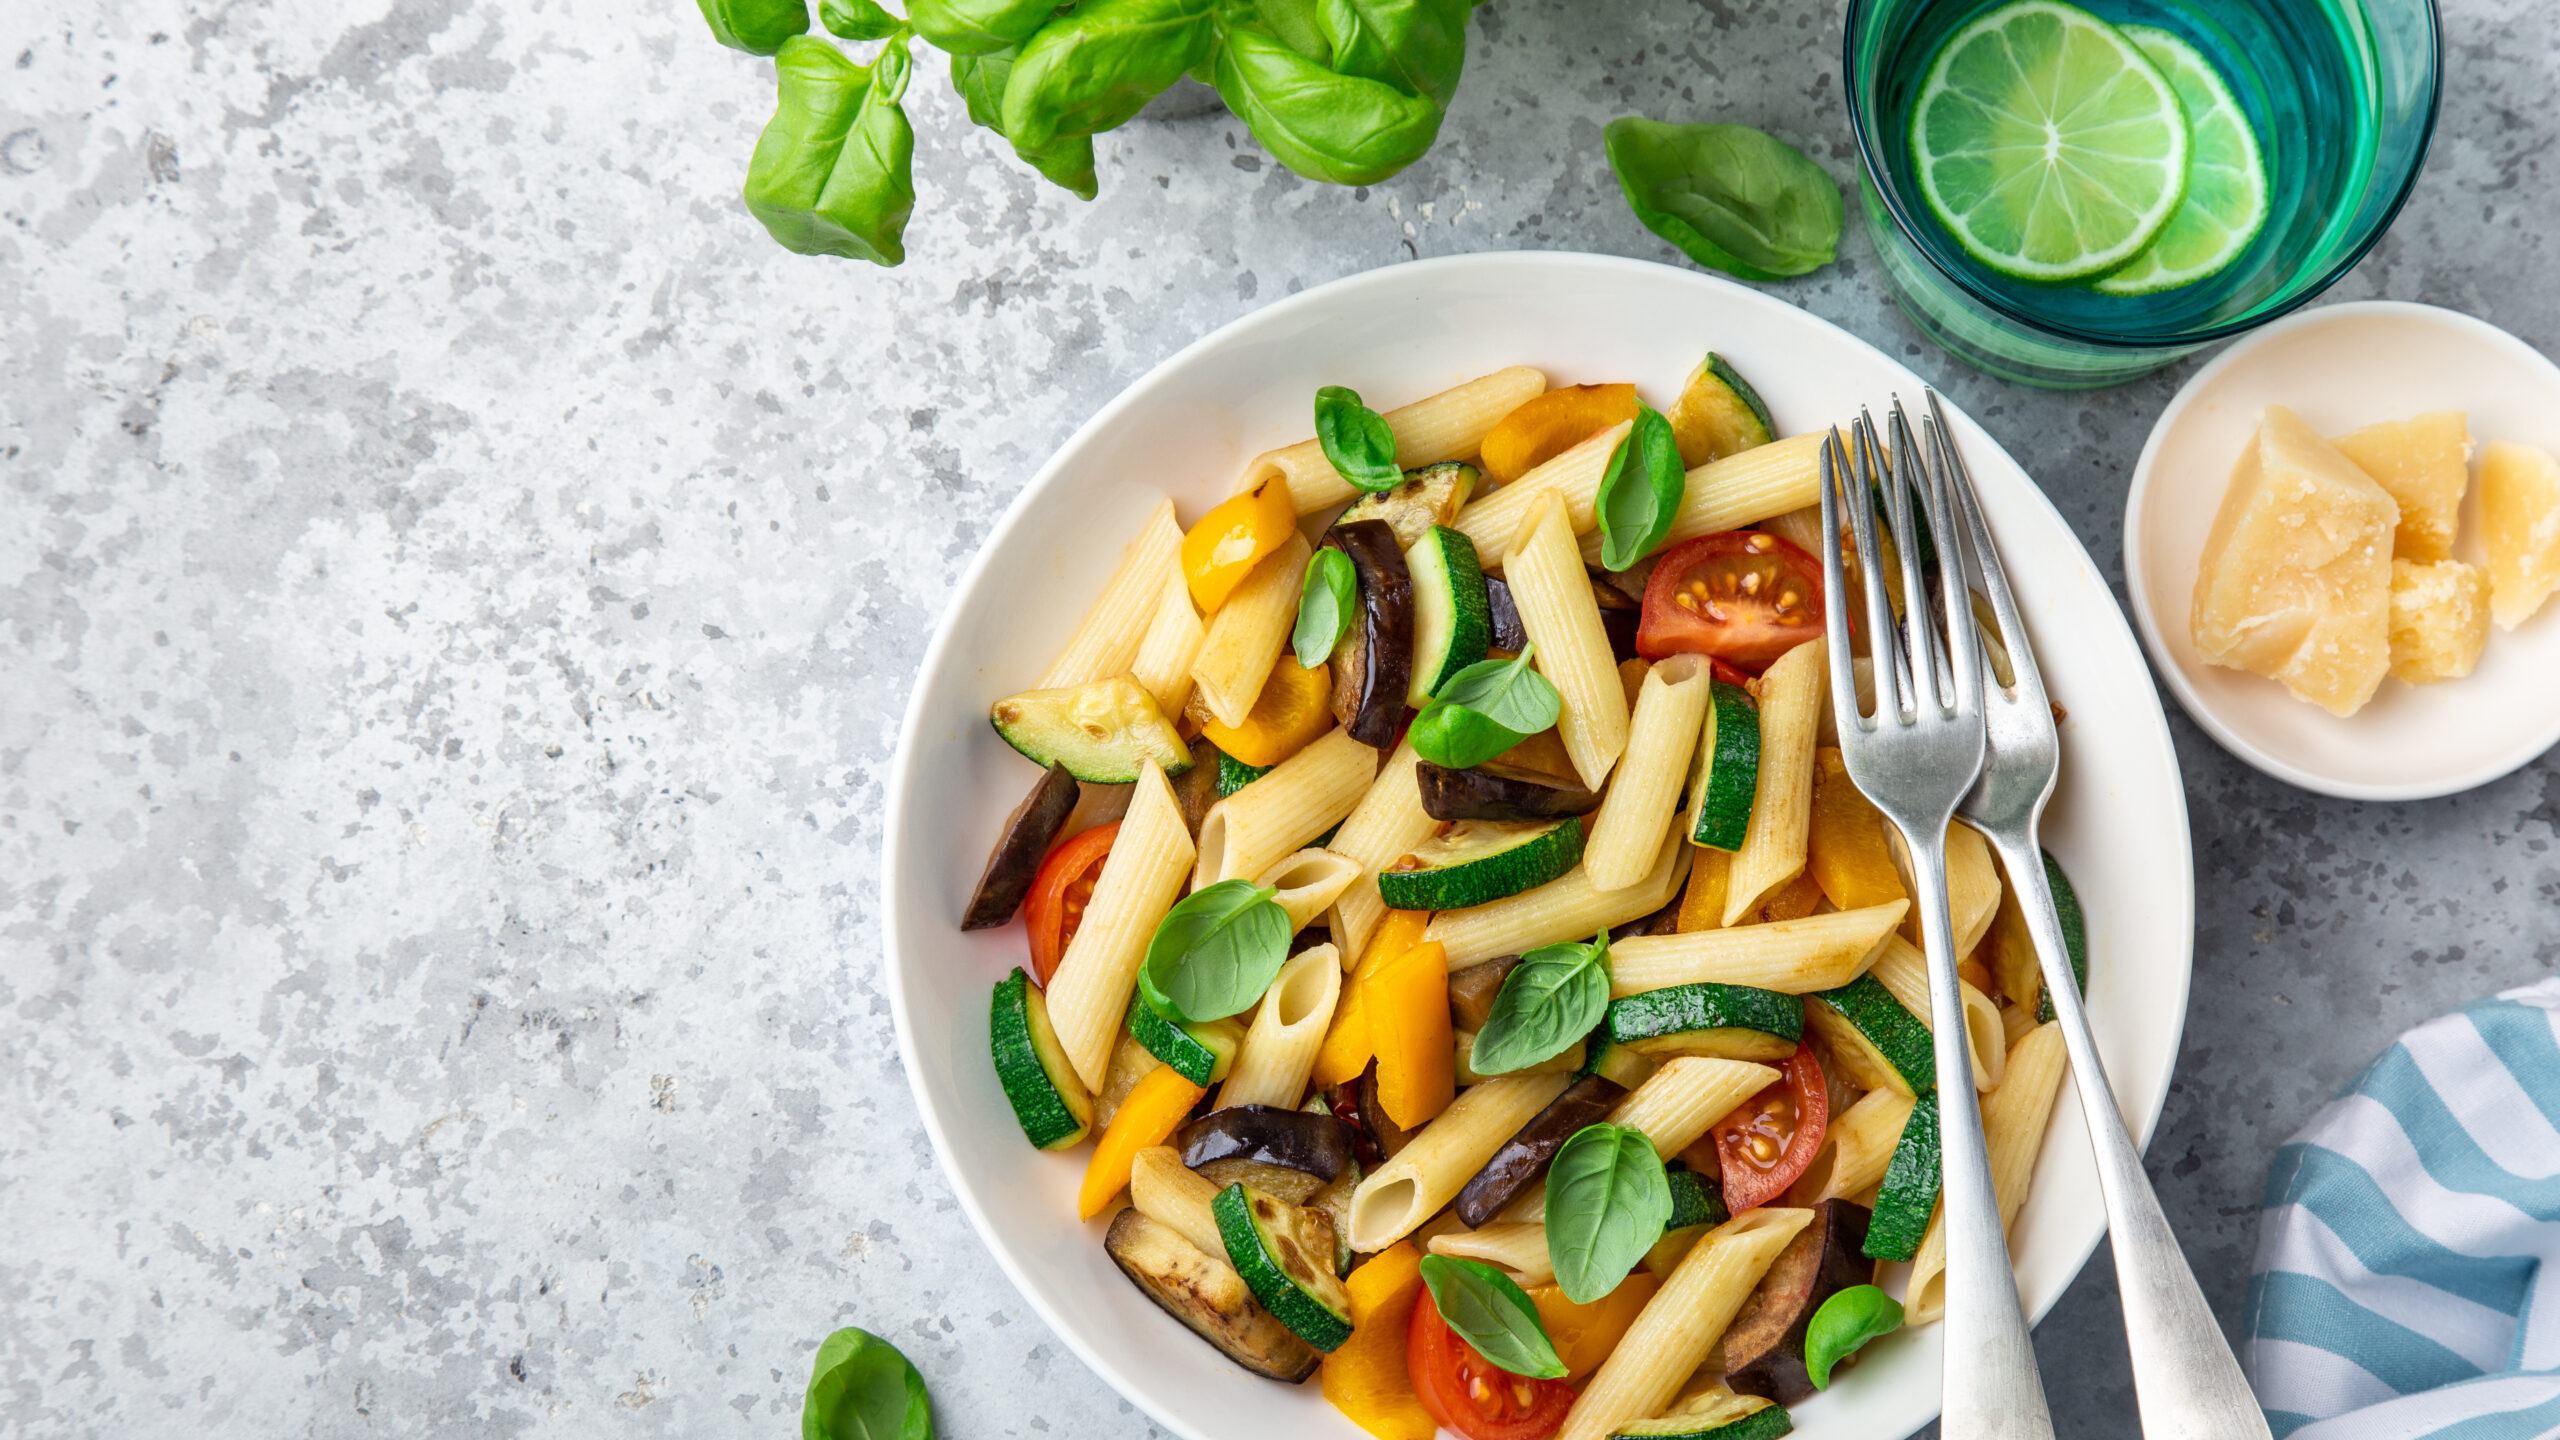 Image for Rainbow Pasta Salad with Grilled Vegetables